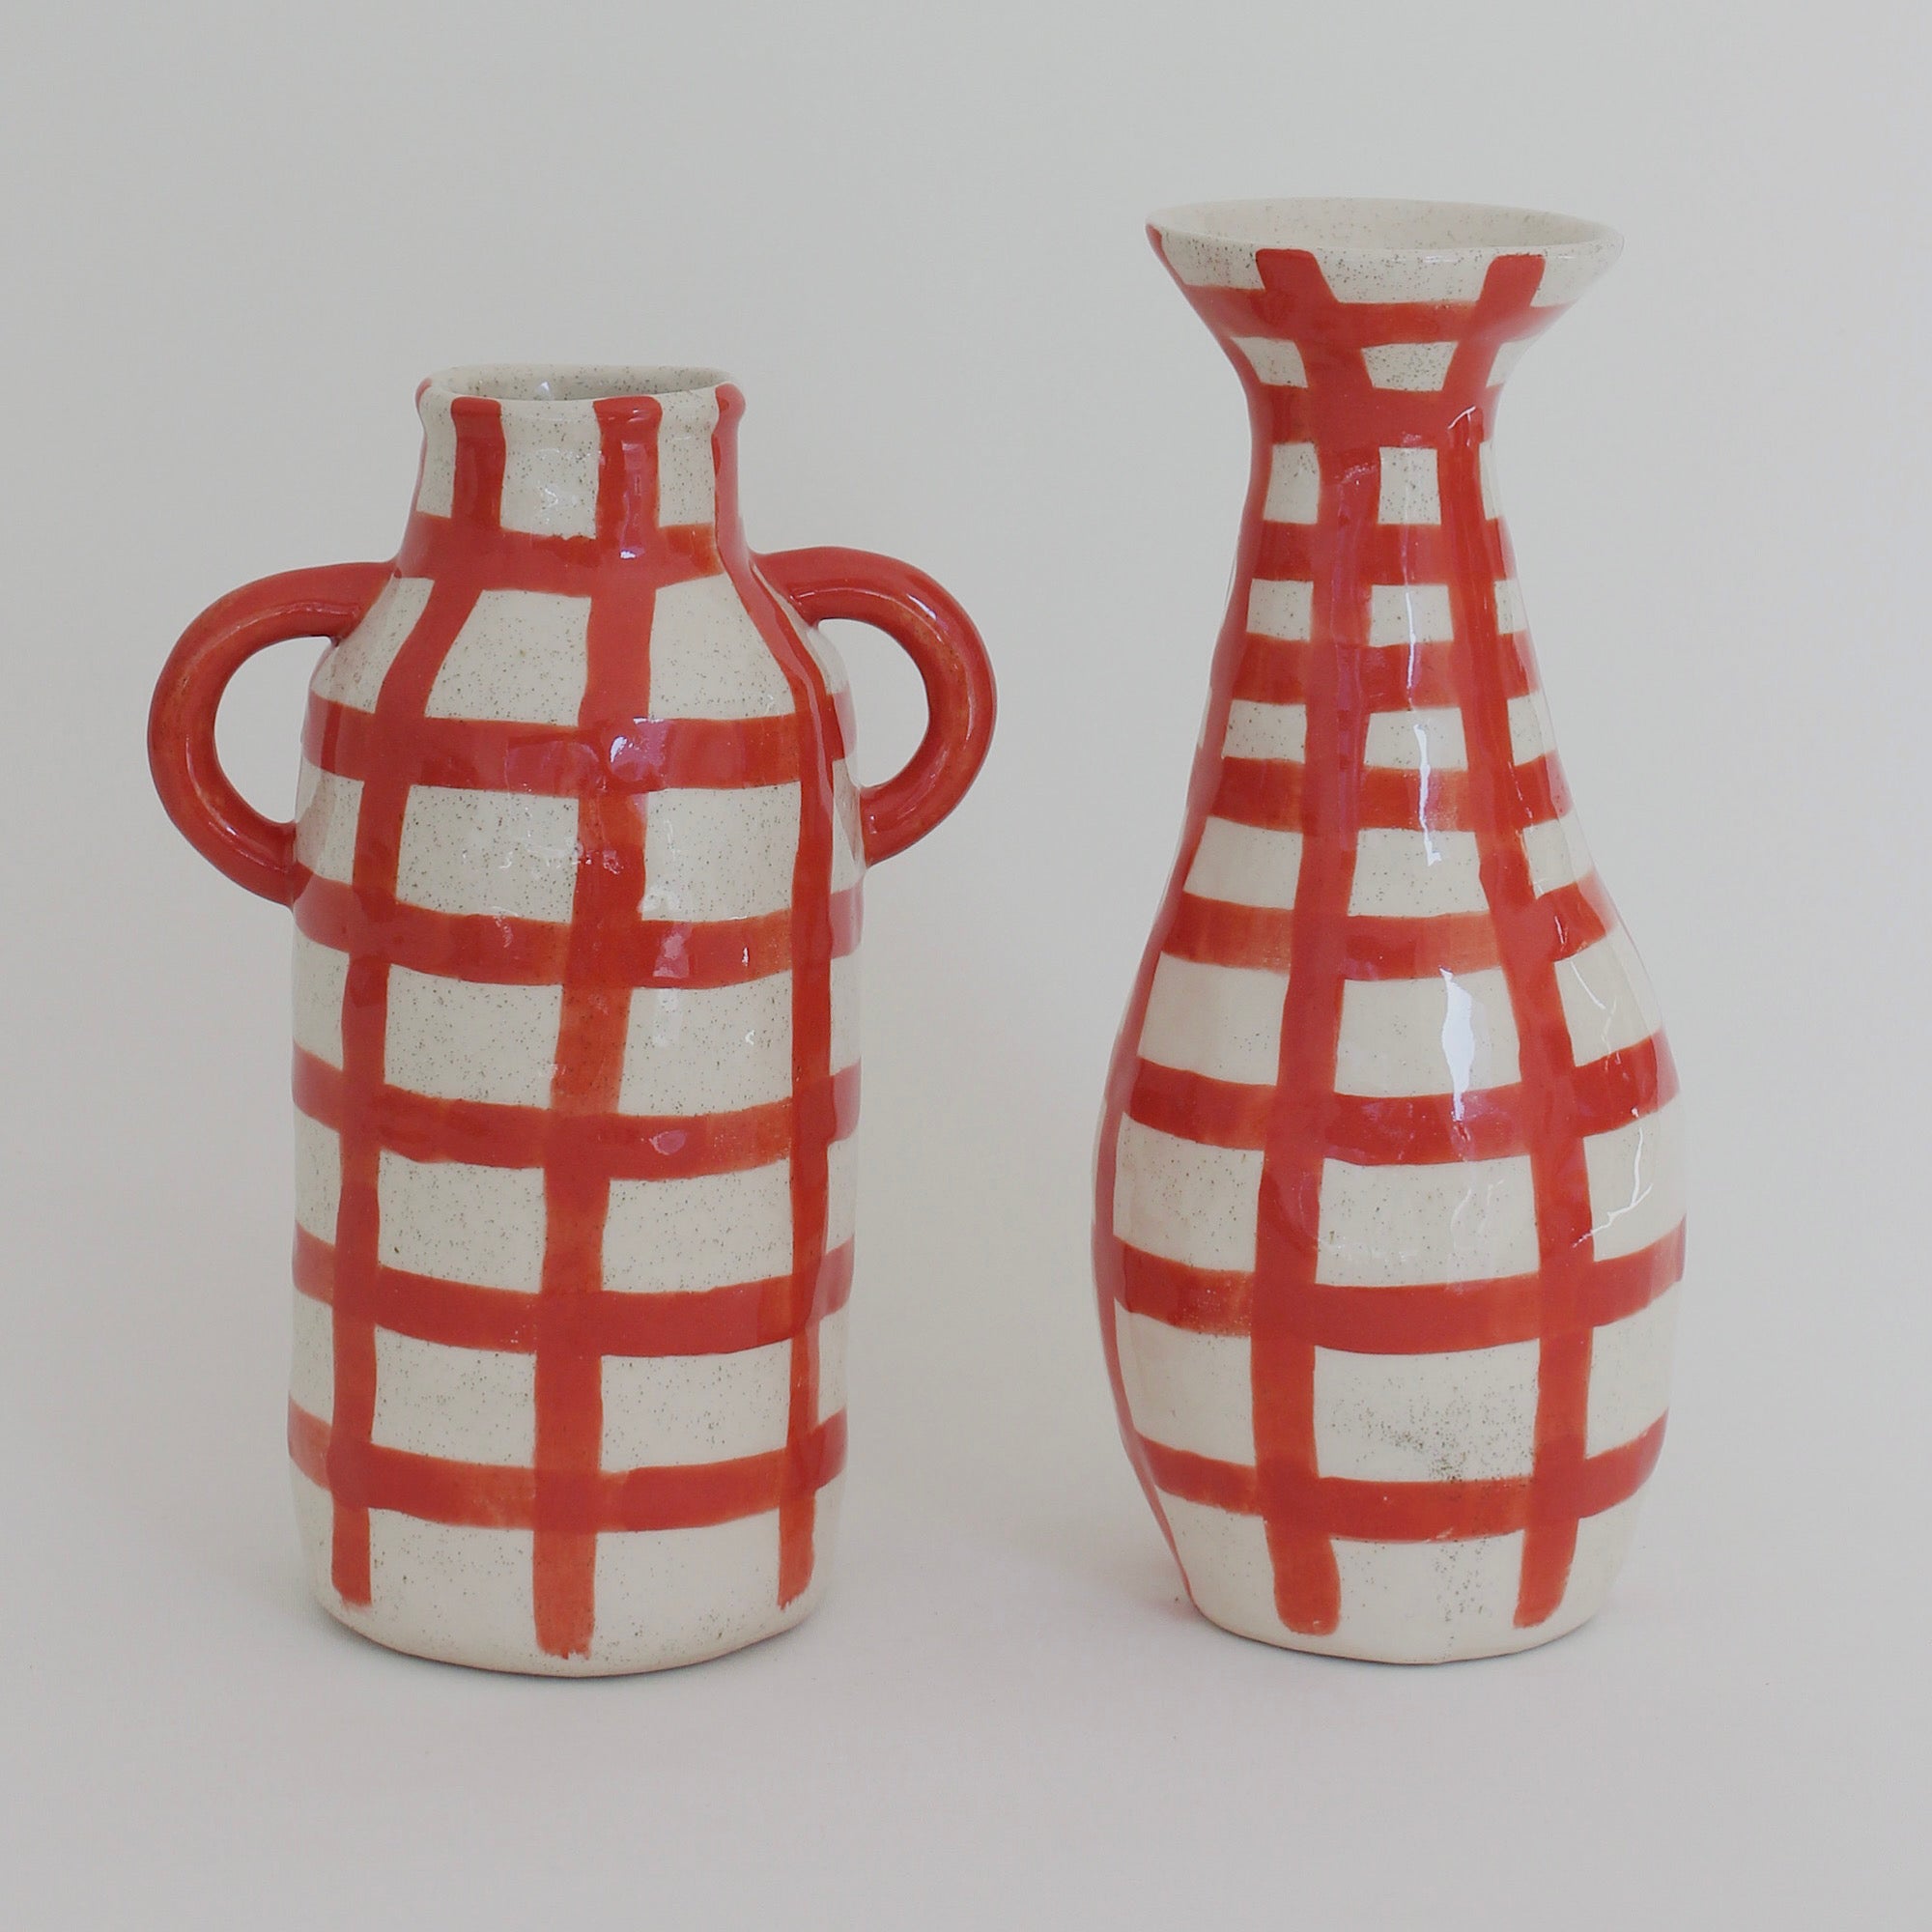 Tall Vase, Red Grid